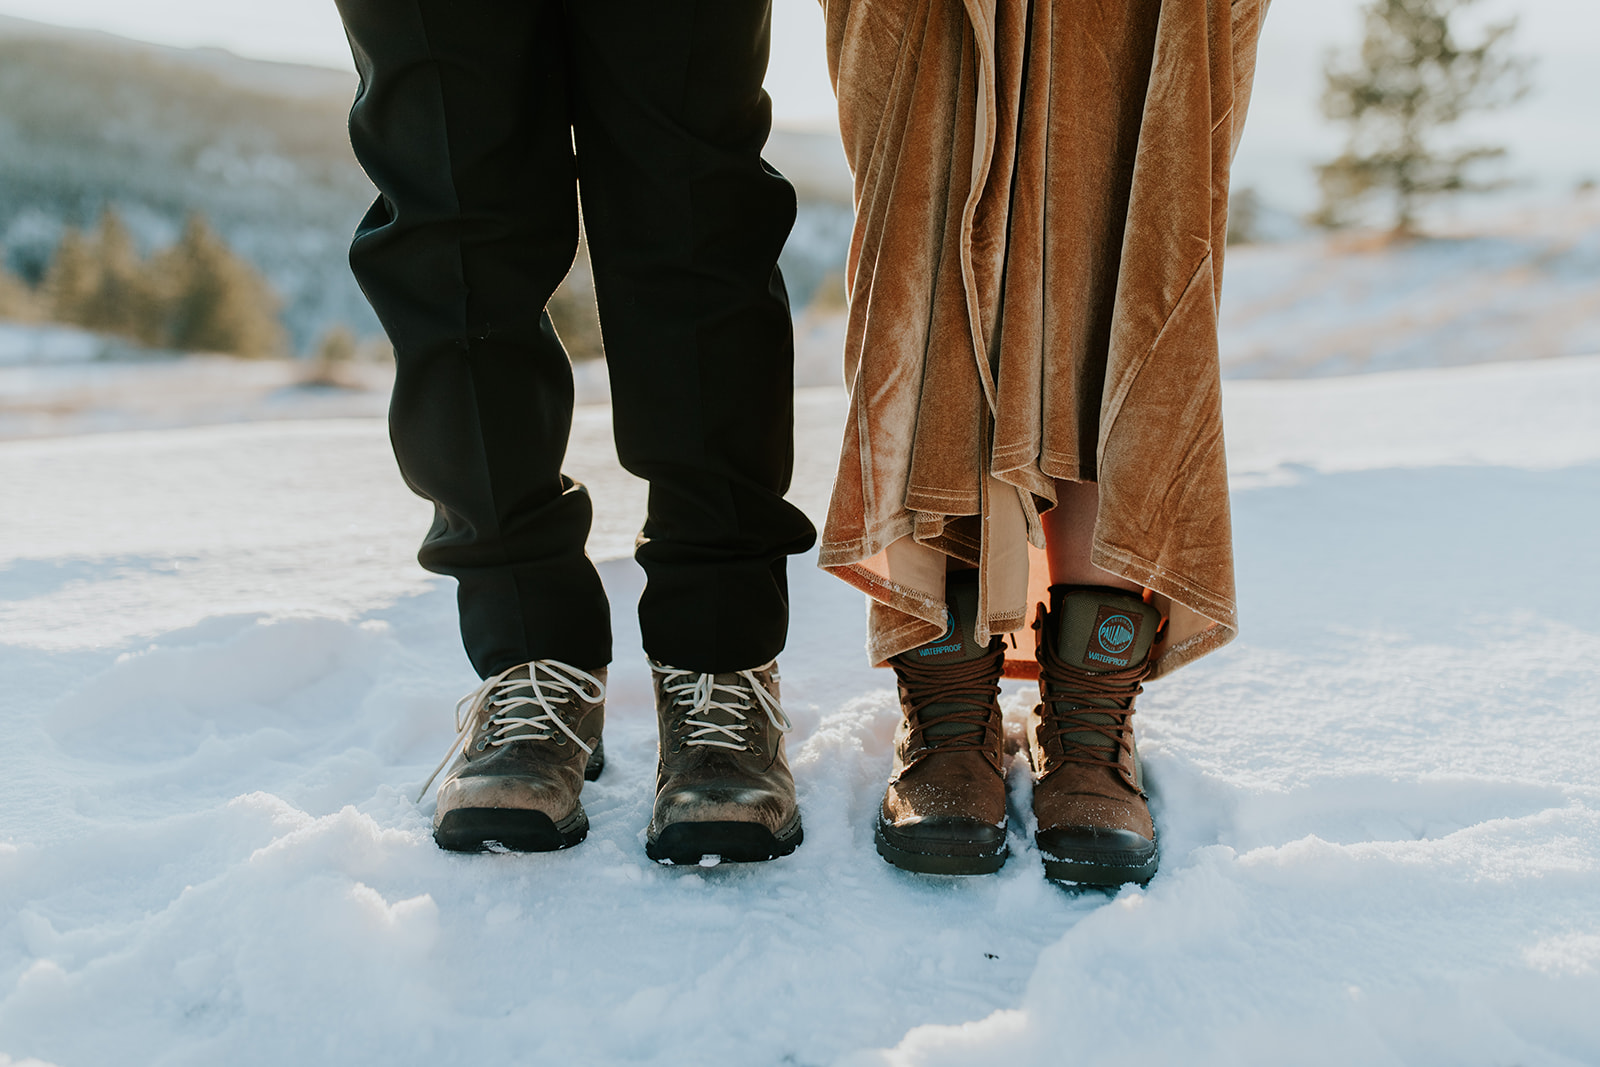 Romantic Chills and Fireside Thrills in This Spruce & Pine Winter BC Elopement | Brontë Bride Blog